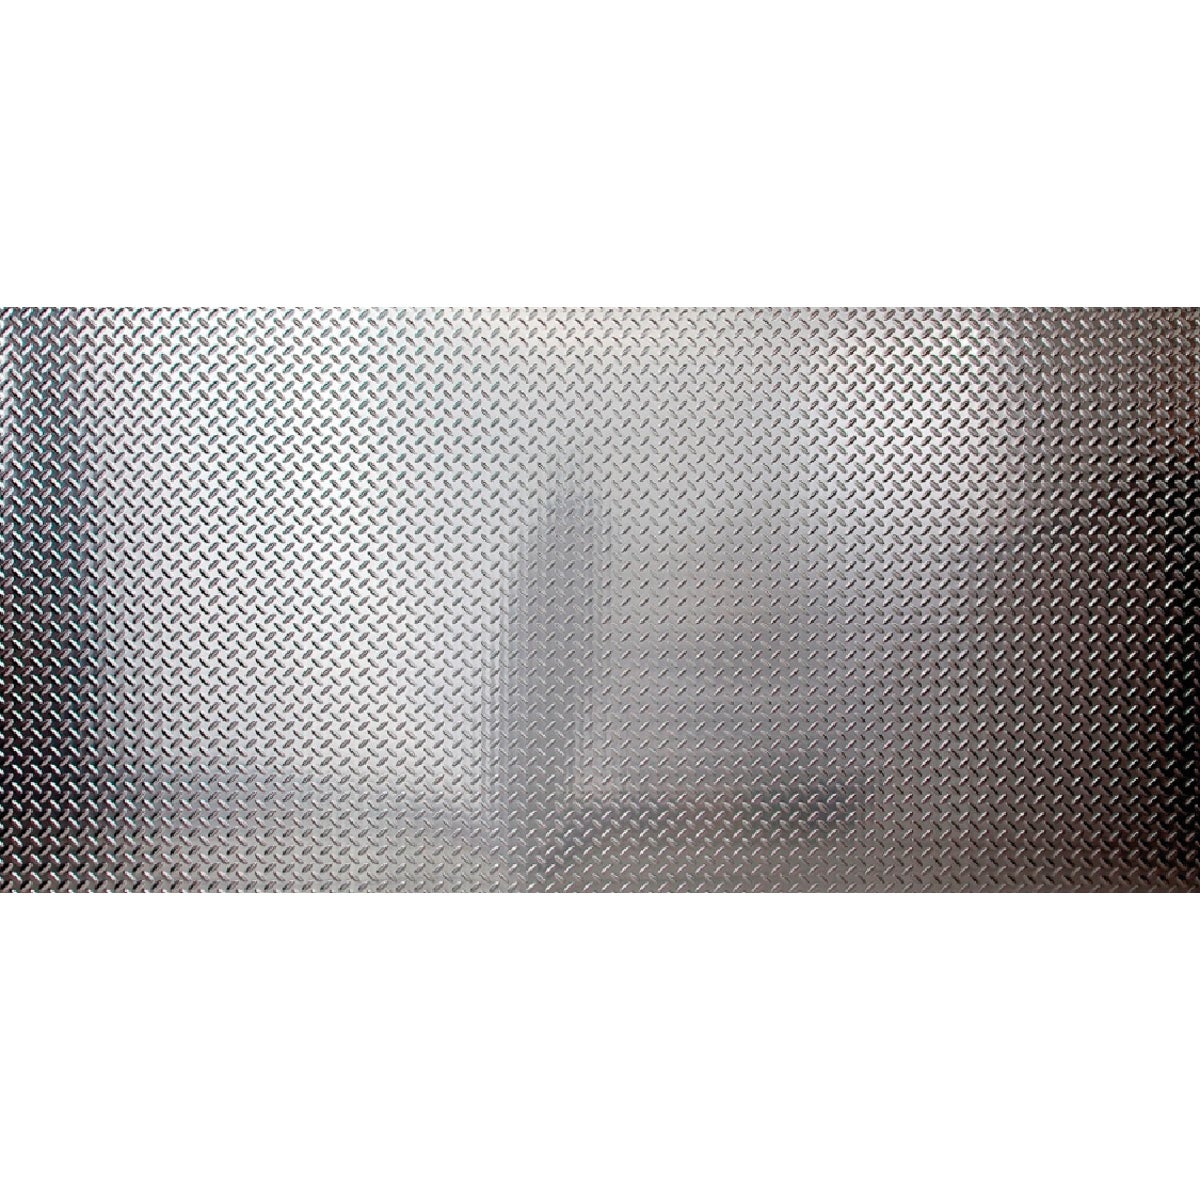 ACP 4 Ft. x 8 Ft. x 0.013 In. Brushed Aluminum Diamond Plate Wall Paneling